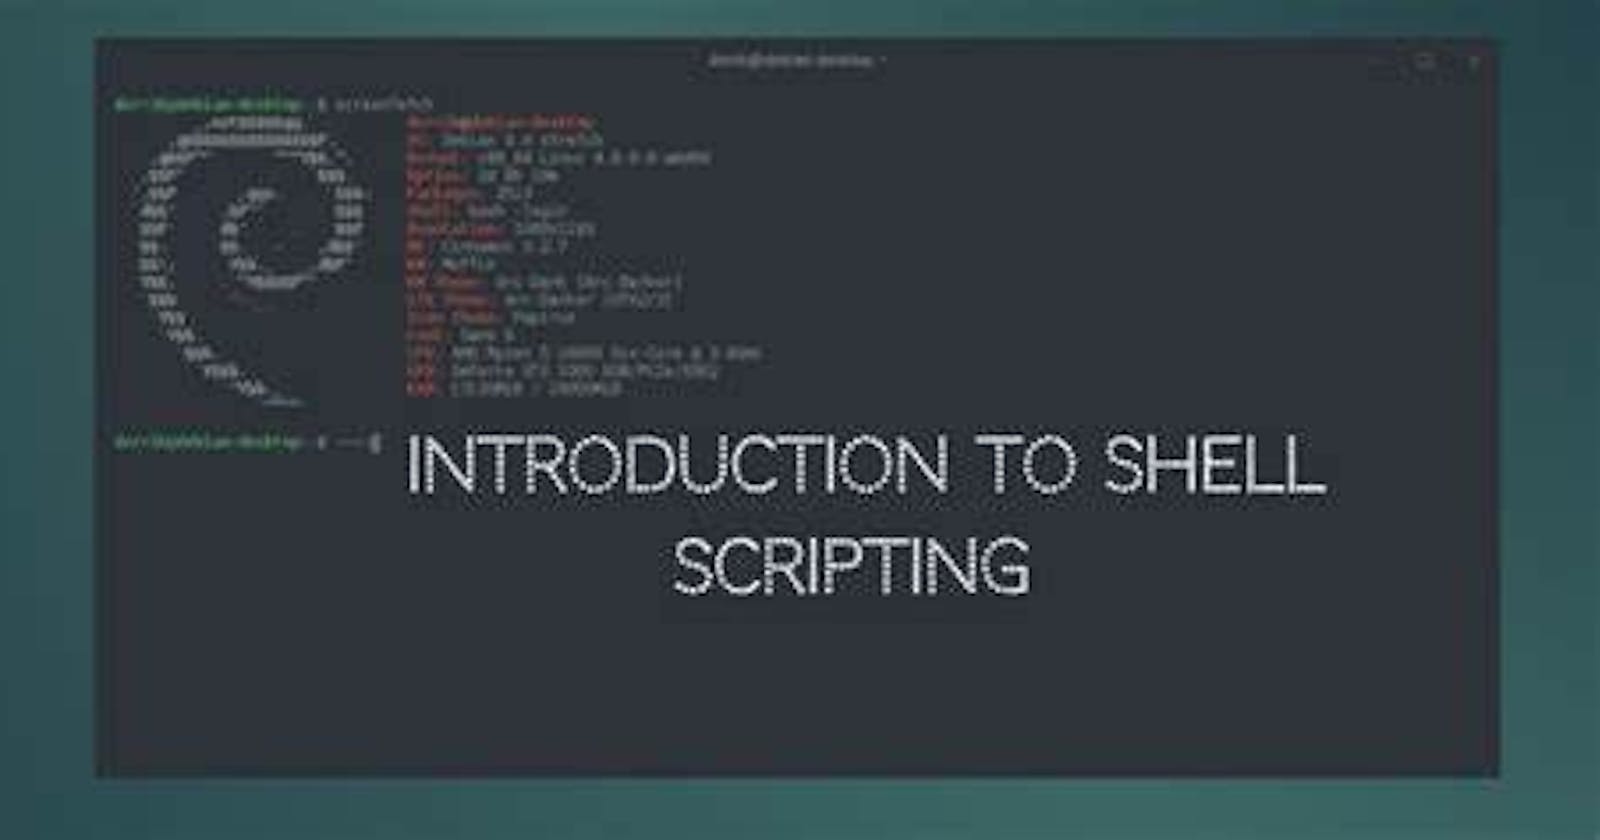 Shell Scripting in Linux